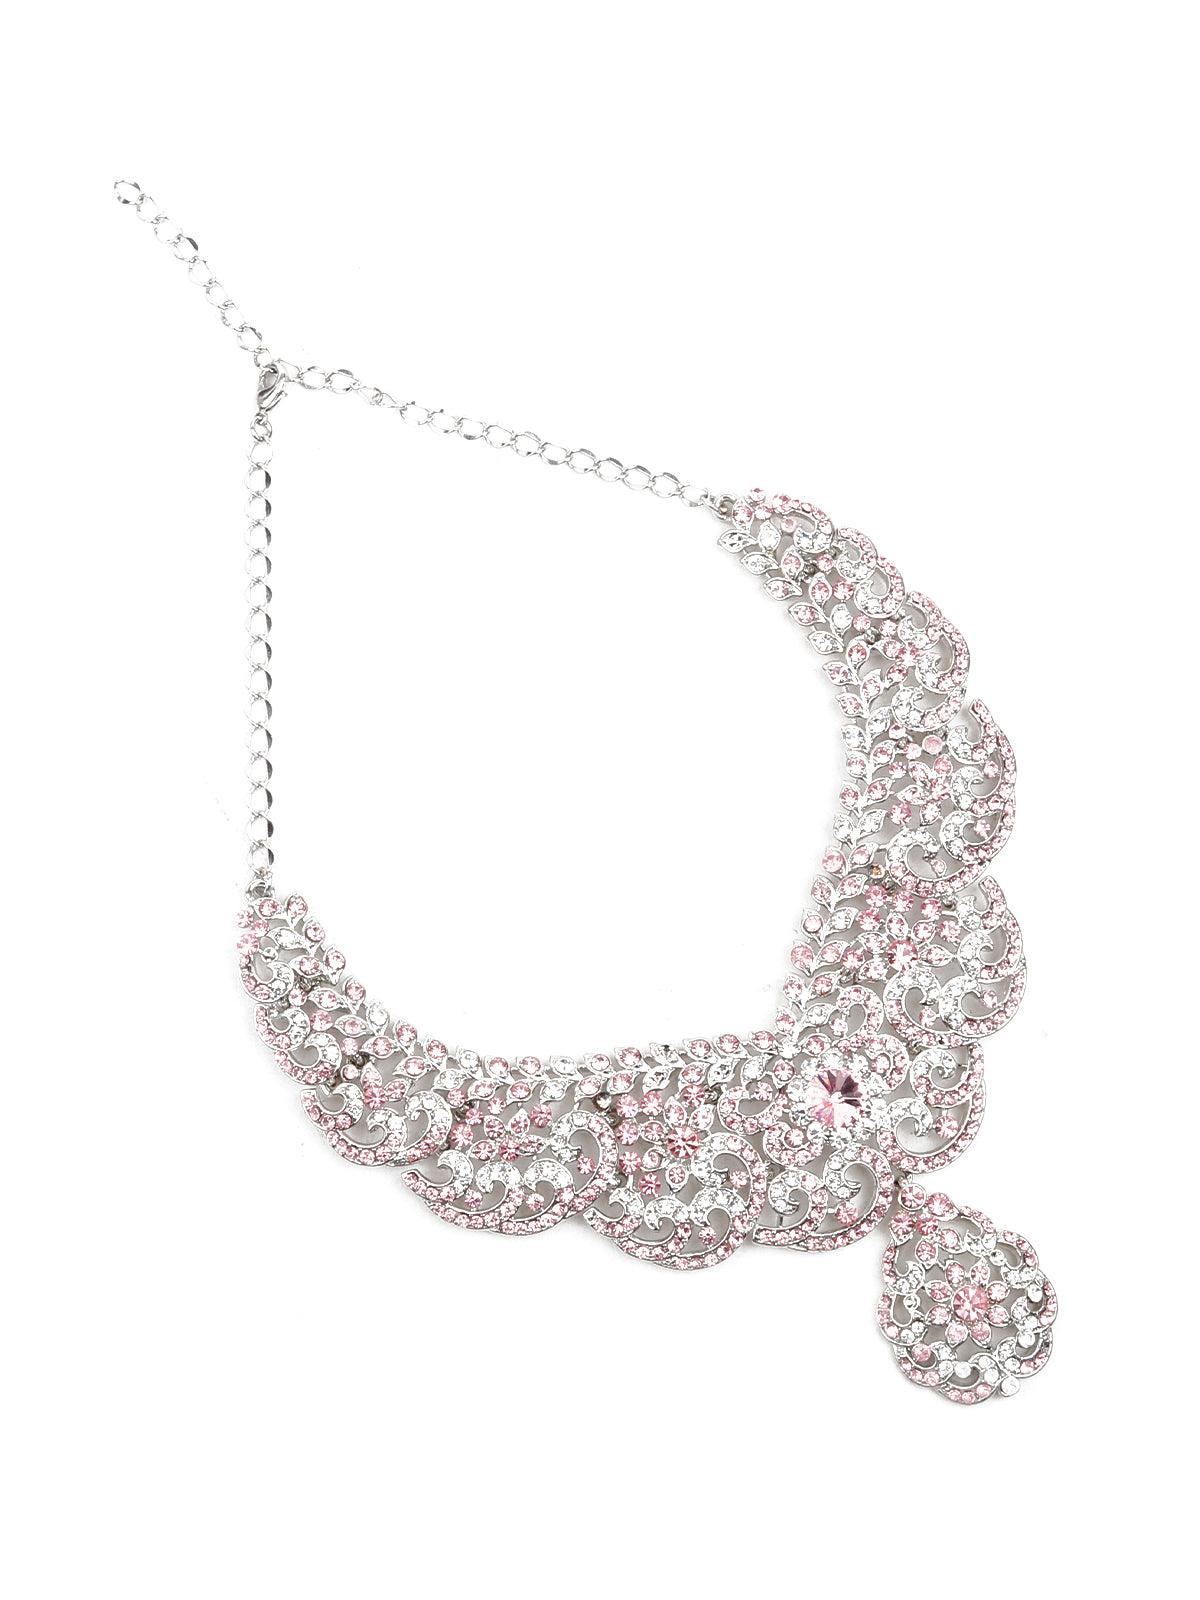 Women's Lovely White And Pink Choker Necklace - Odette